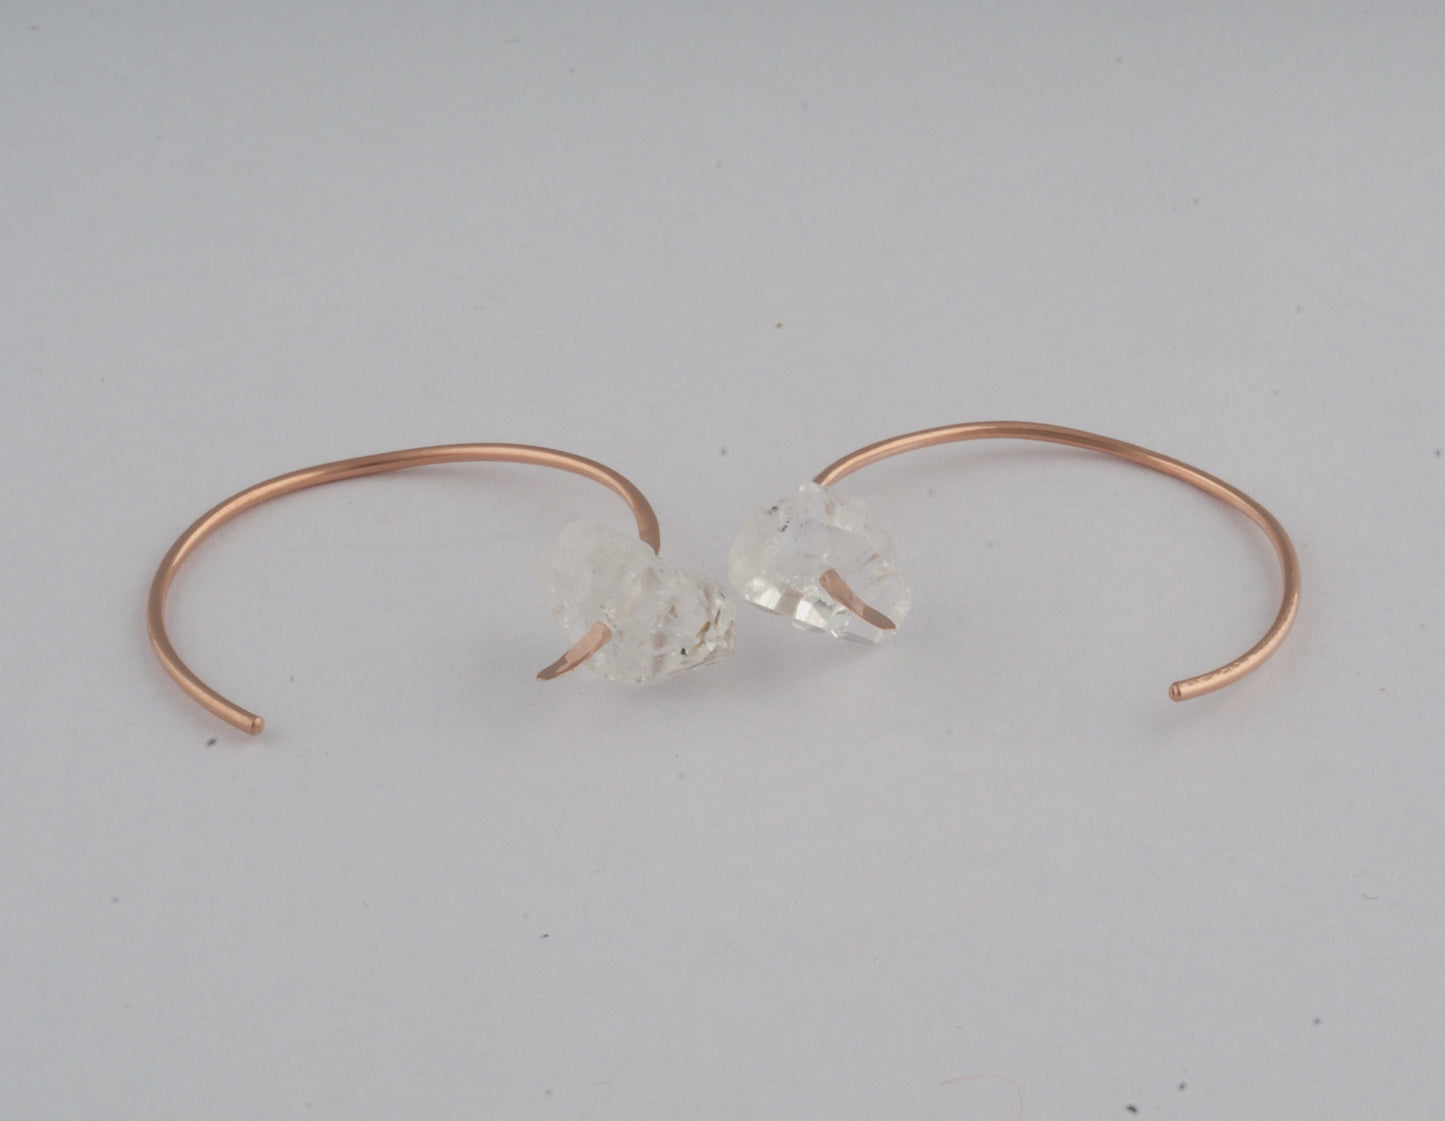 Solid 925 Sterling Silver Herkimer Diamond Hoop Earring Silver / Rose Gold, April Birthstone, Dainty, Quirky , Anniversary, Birthday, Girl